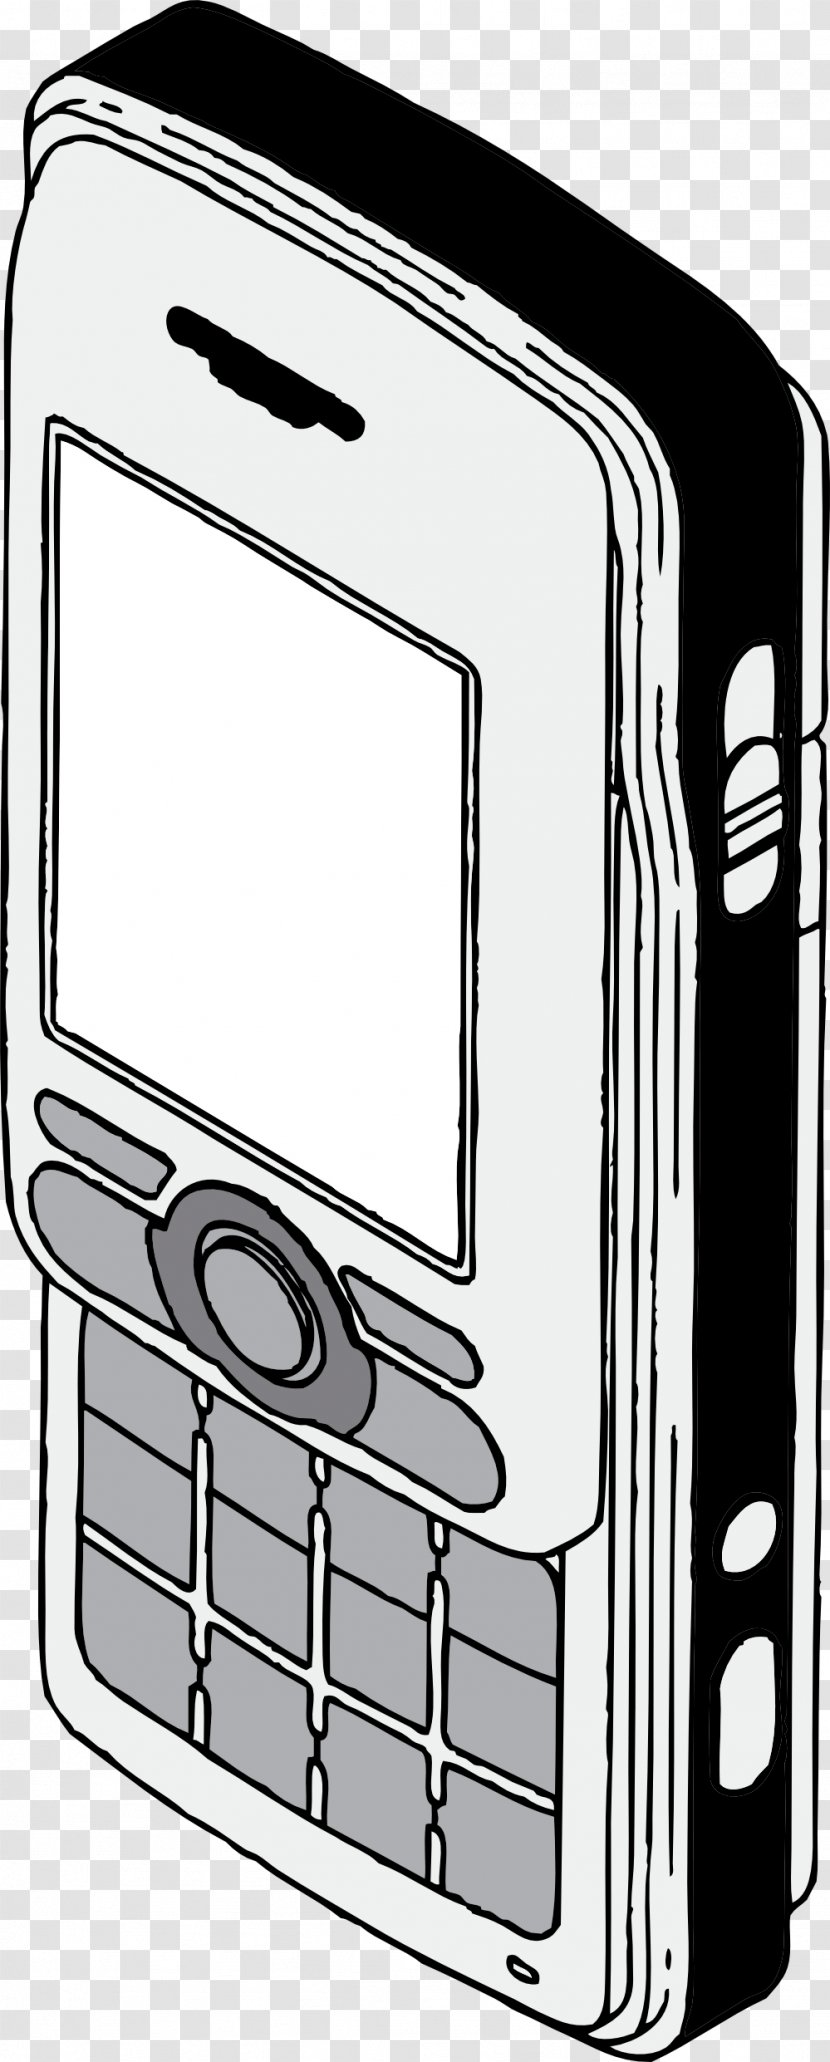 IPhone Line Art Telephone Coloring Book Clip - Telephony - Iphone Transparent PNG